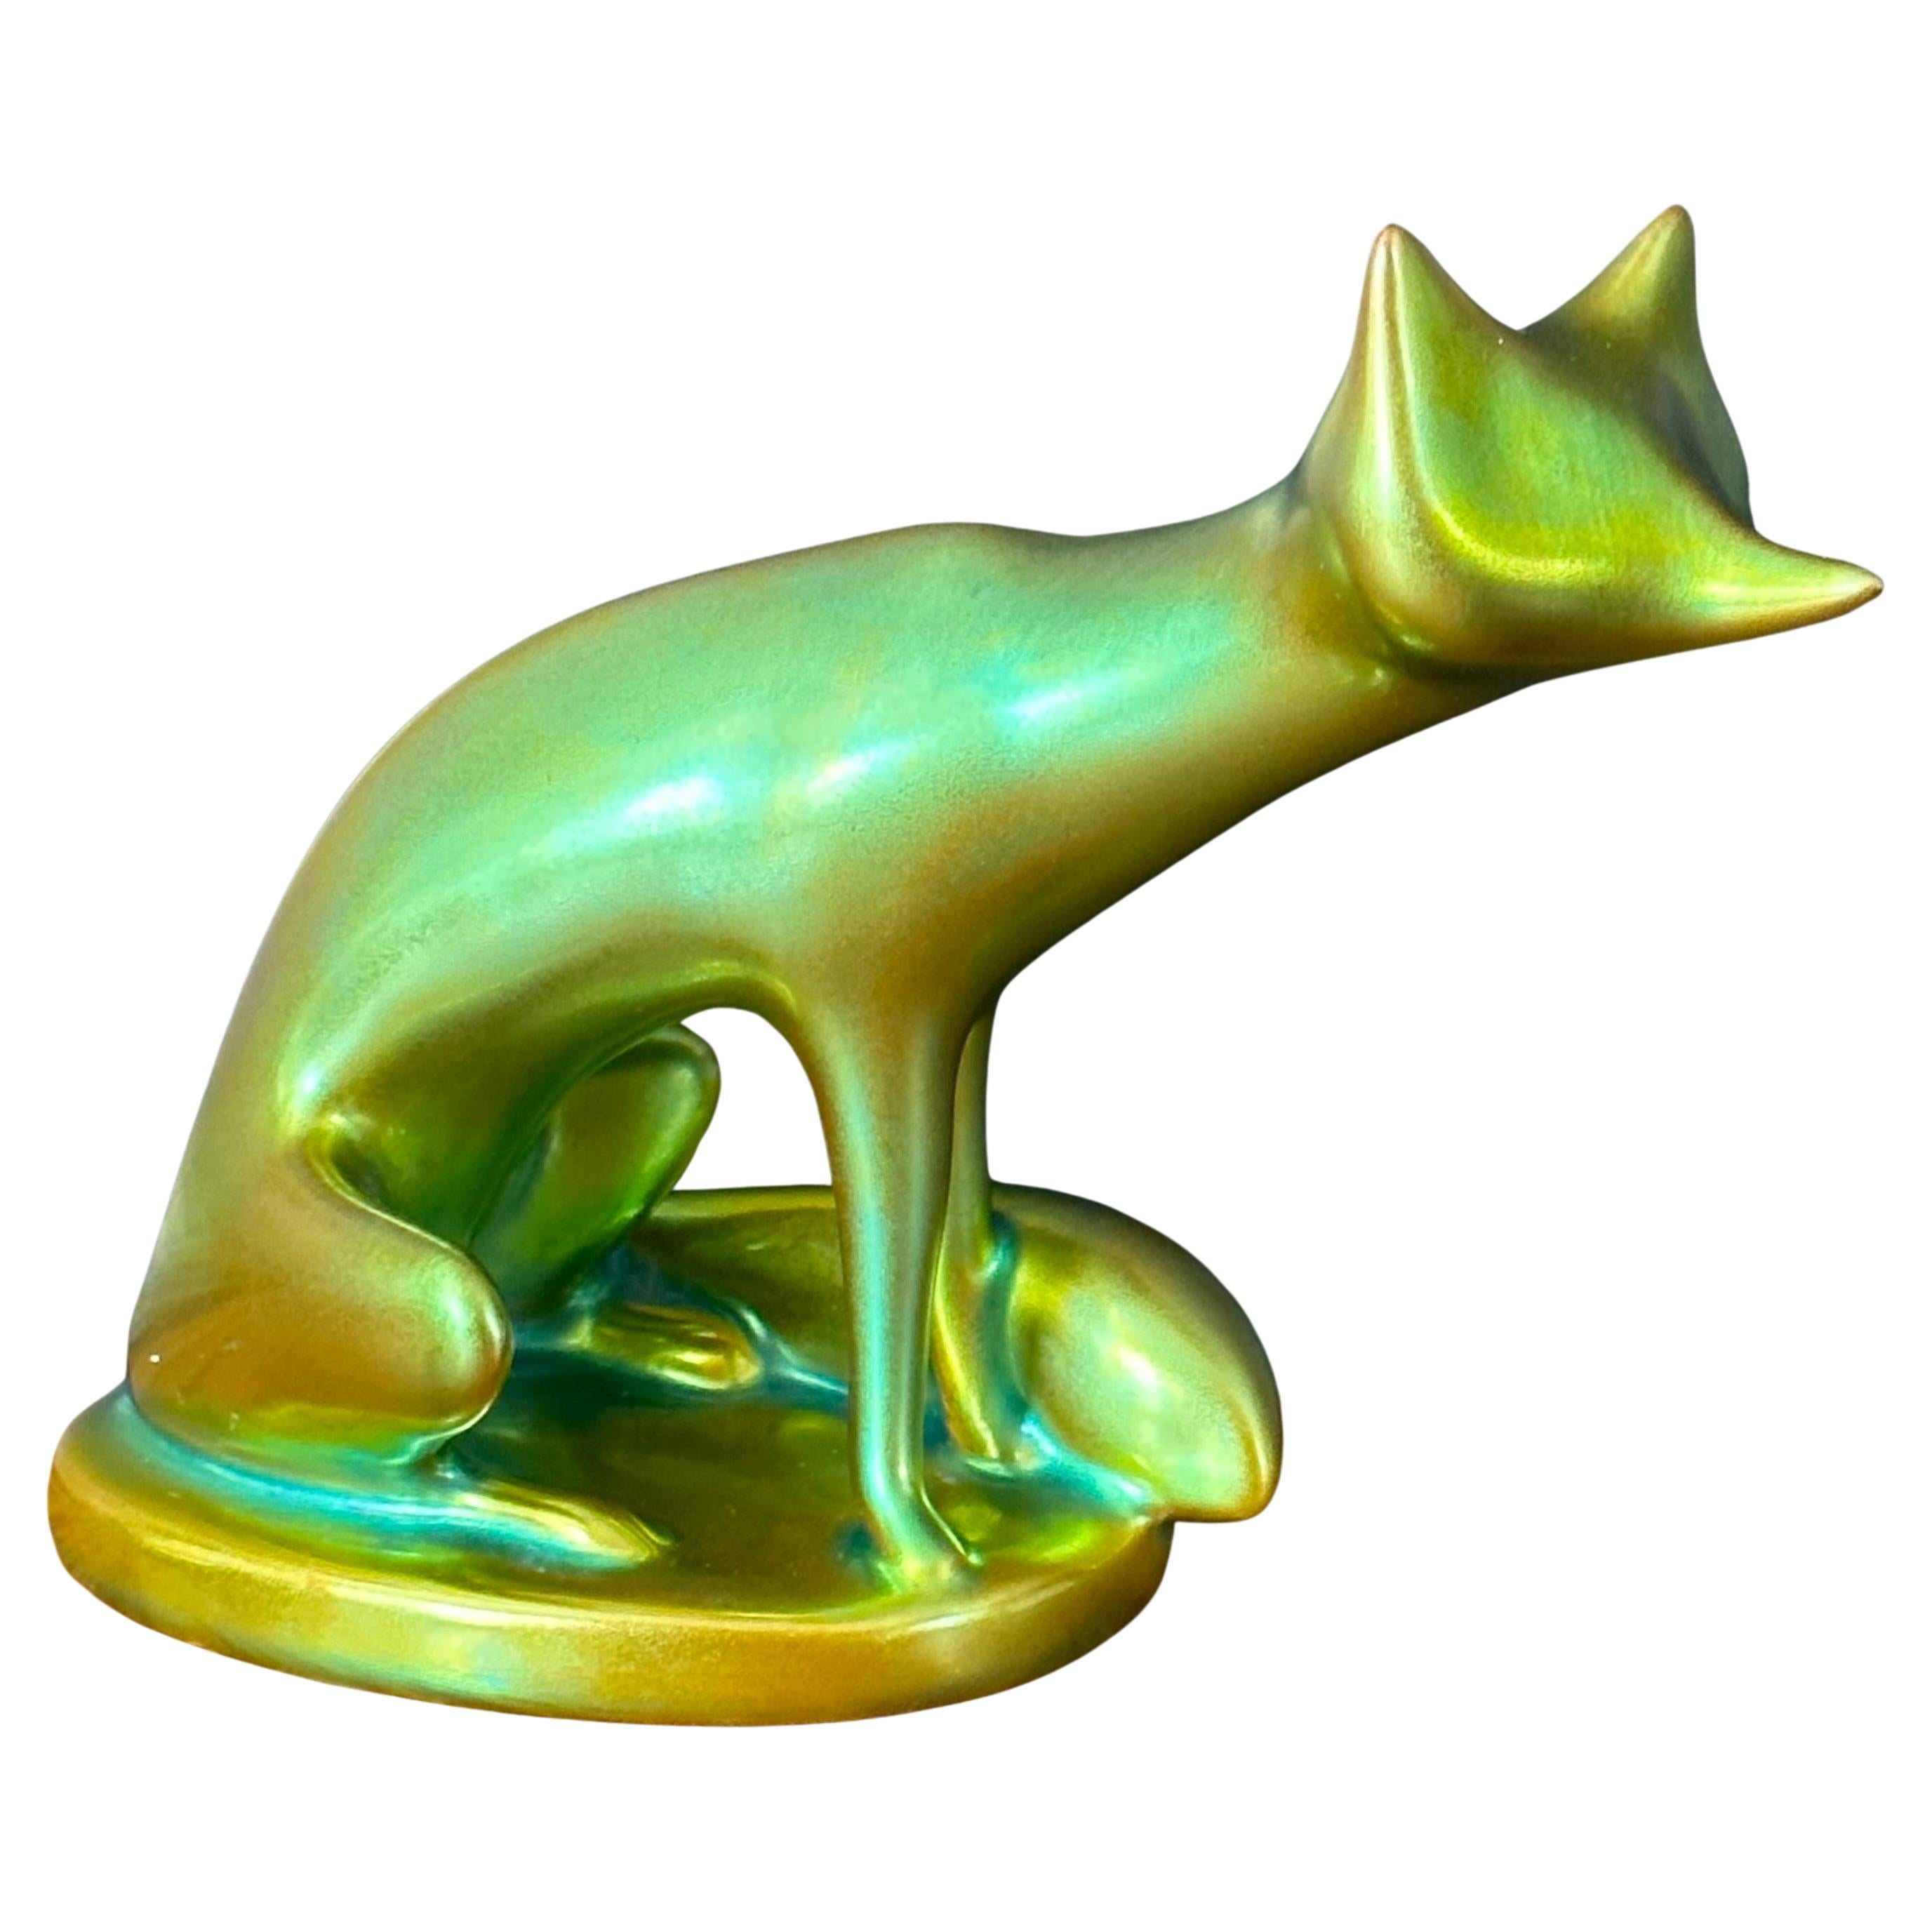 Hungarian Stylized Art Nouveau Eosin Green Porcelain Fox Sculpture by Zsolnay For Sale